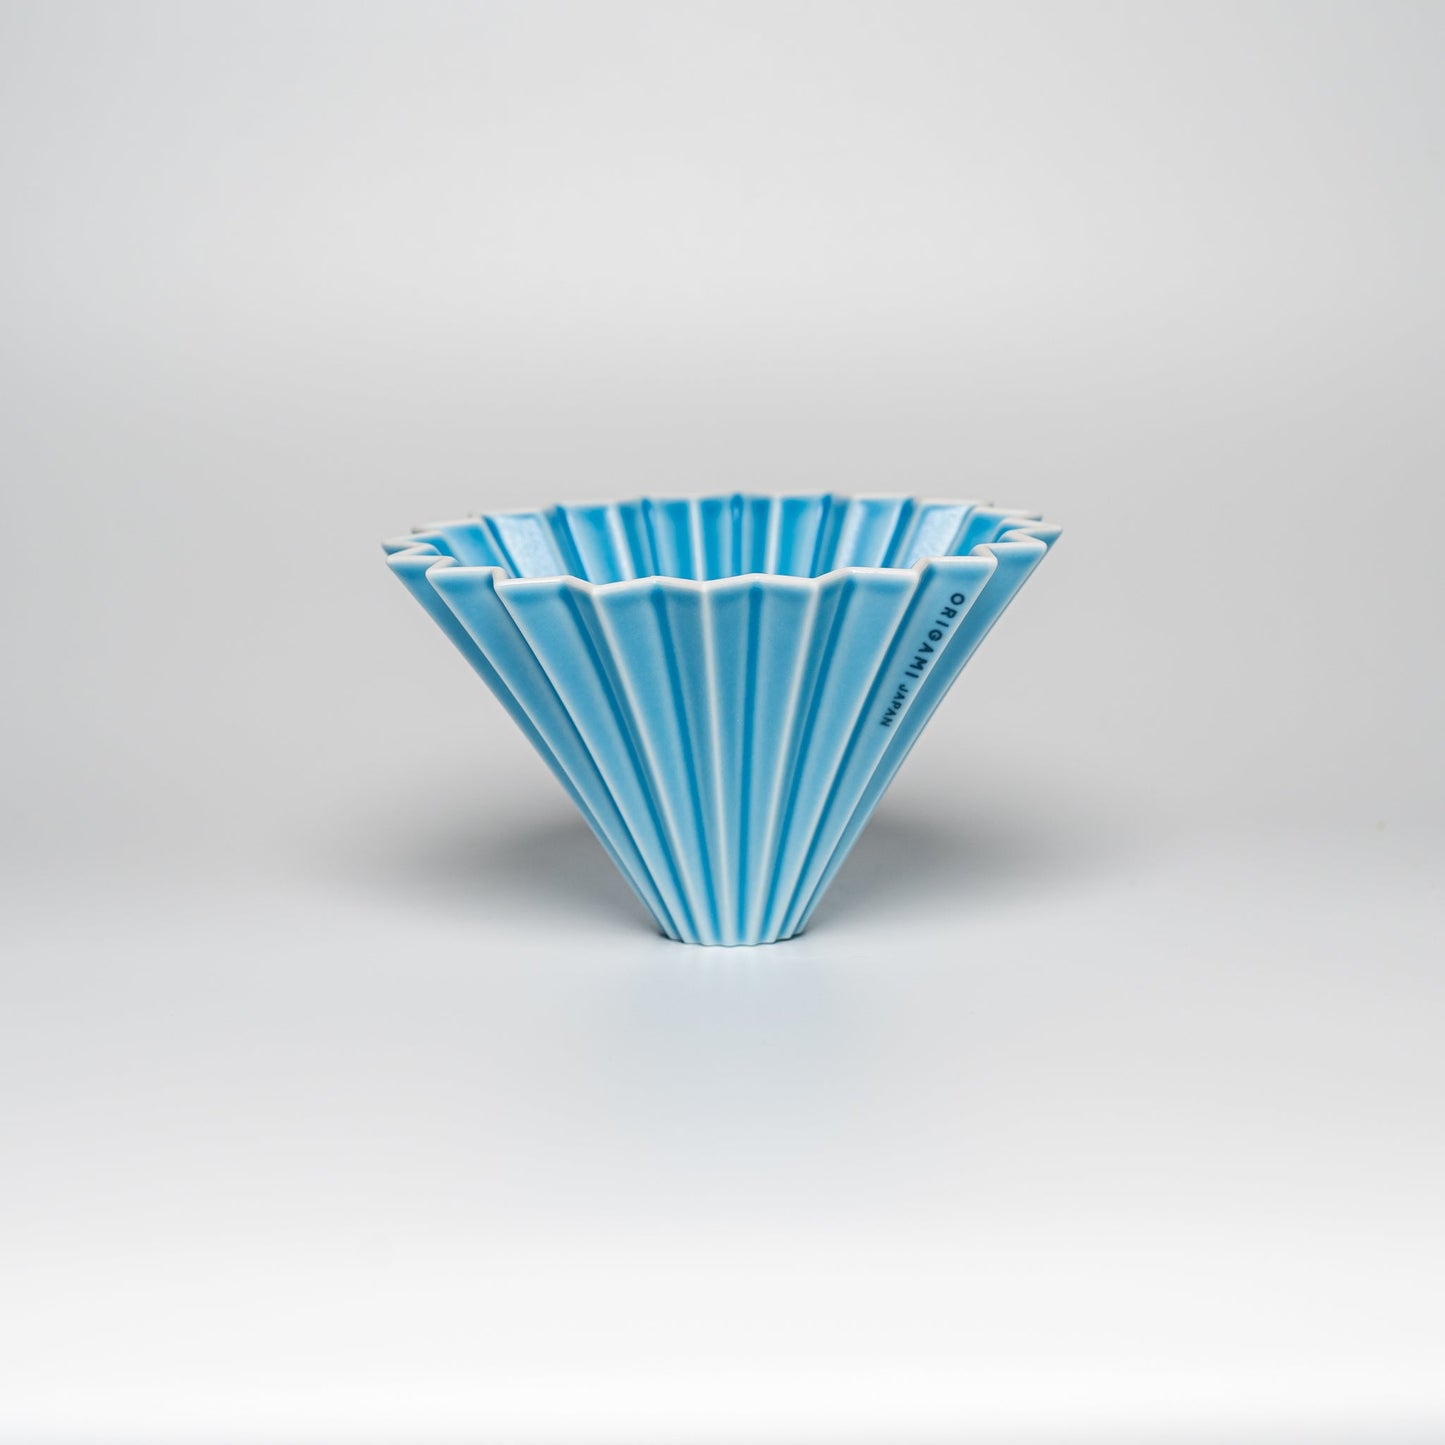 A bright blue ORIGAMI coffee dripper on a white background